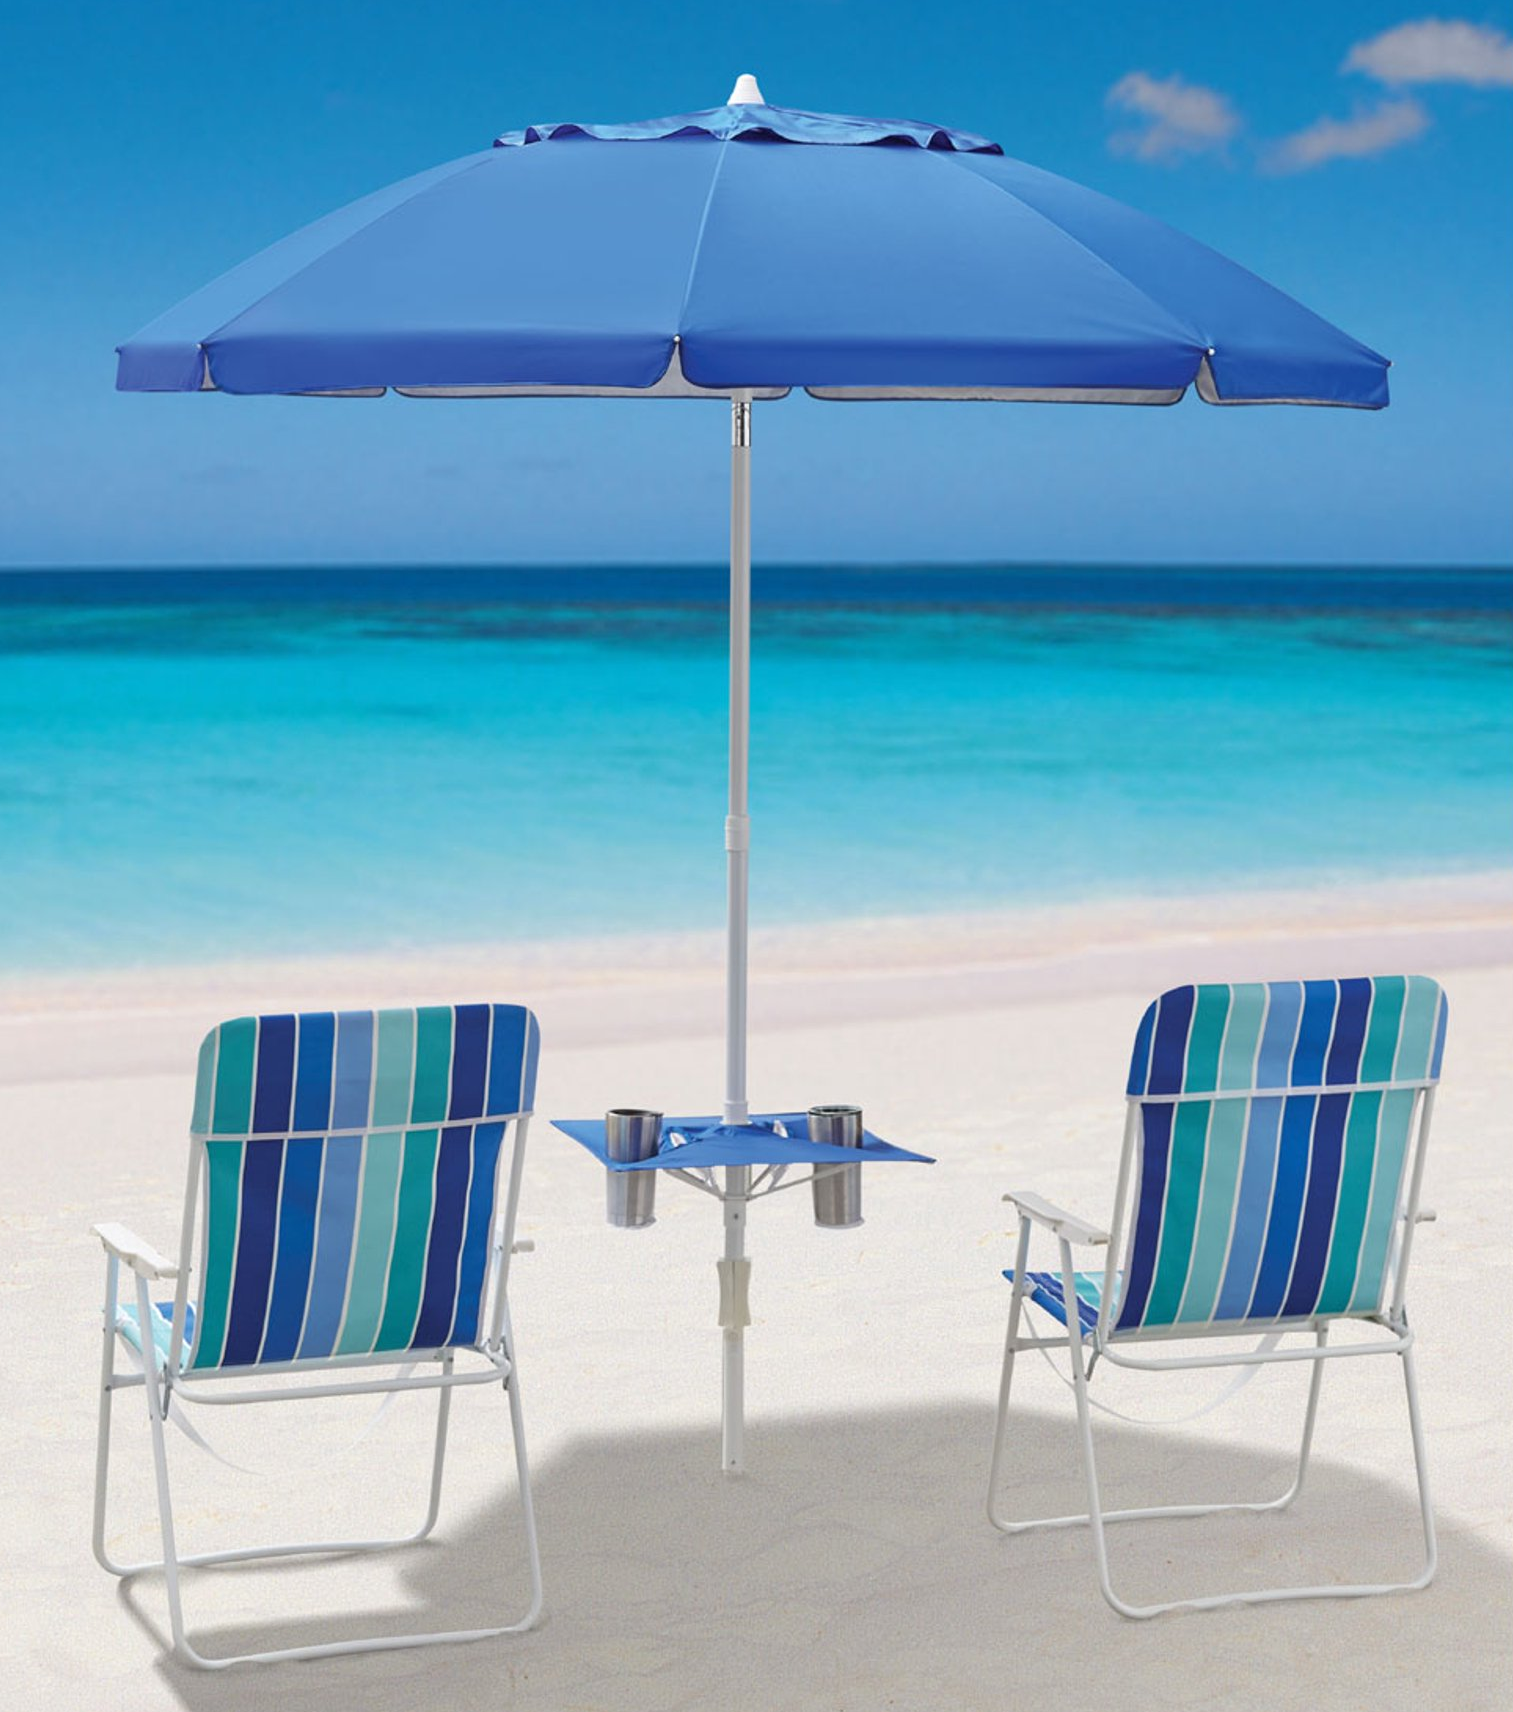 Image of the blue beach umbrella with two blue beach chairs